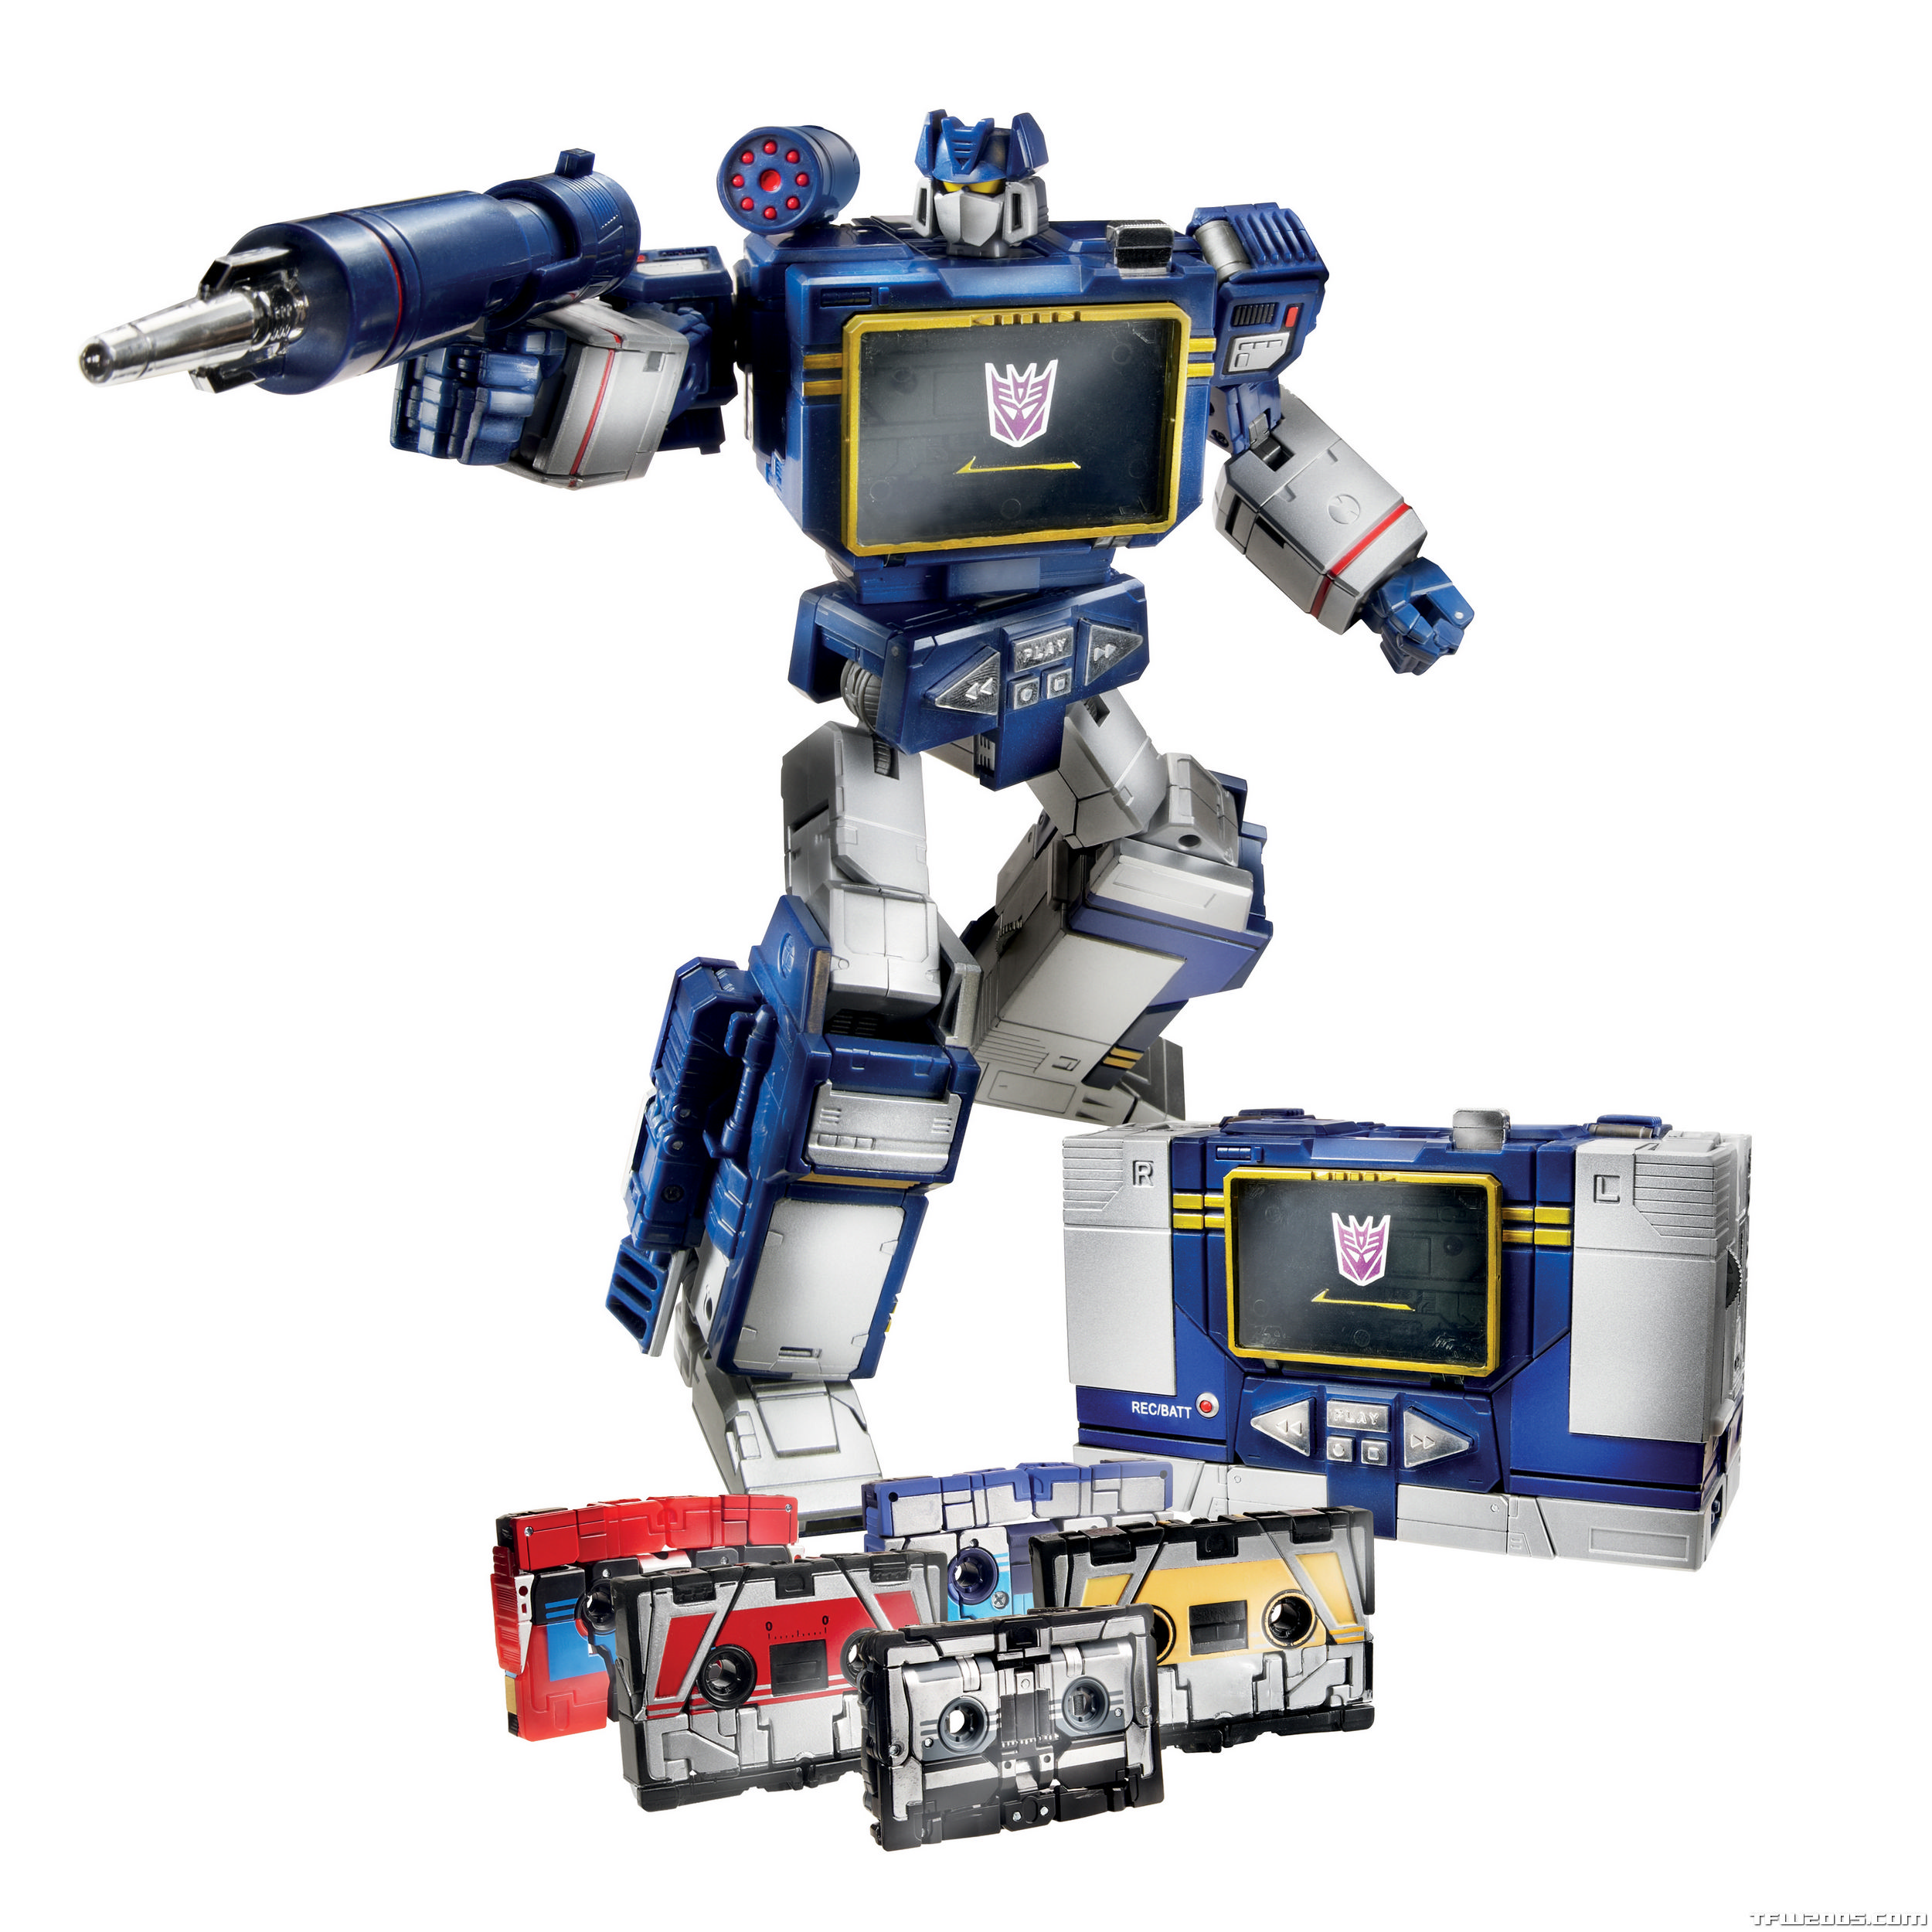 A43480610-Transformers-Masterpiece-Soundwave-ALL_rs_1362457440.jpg